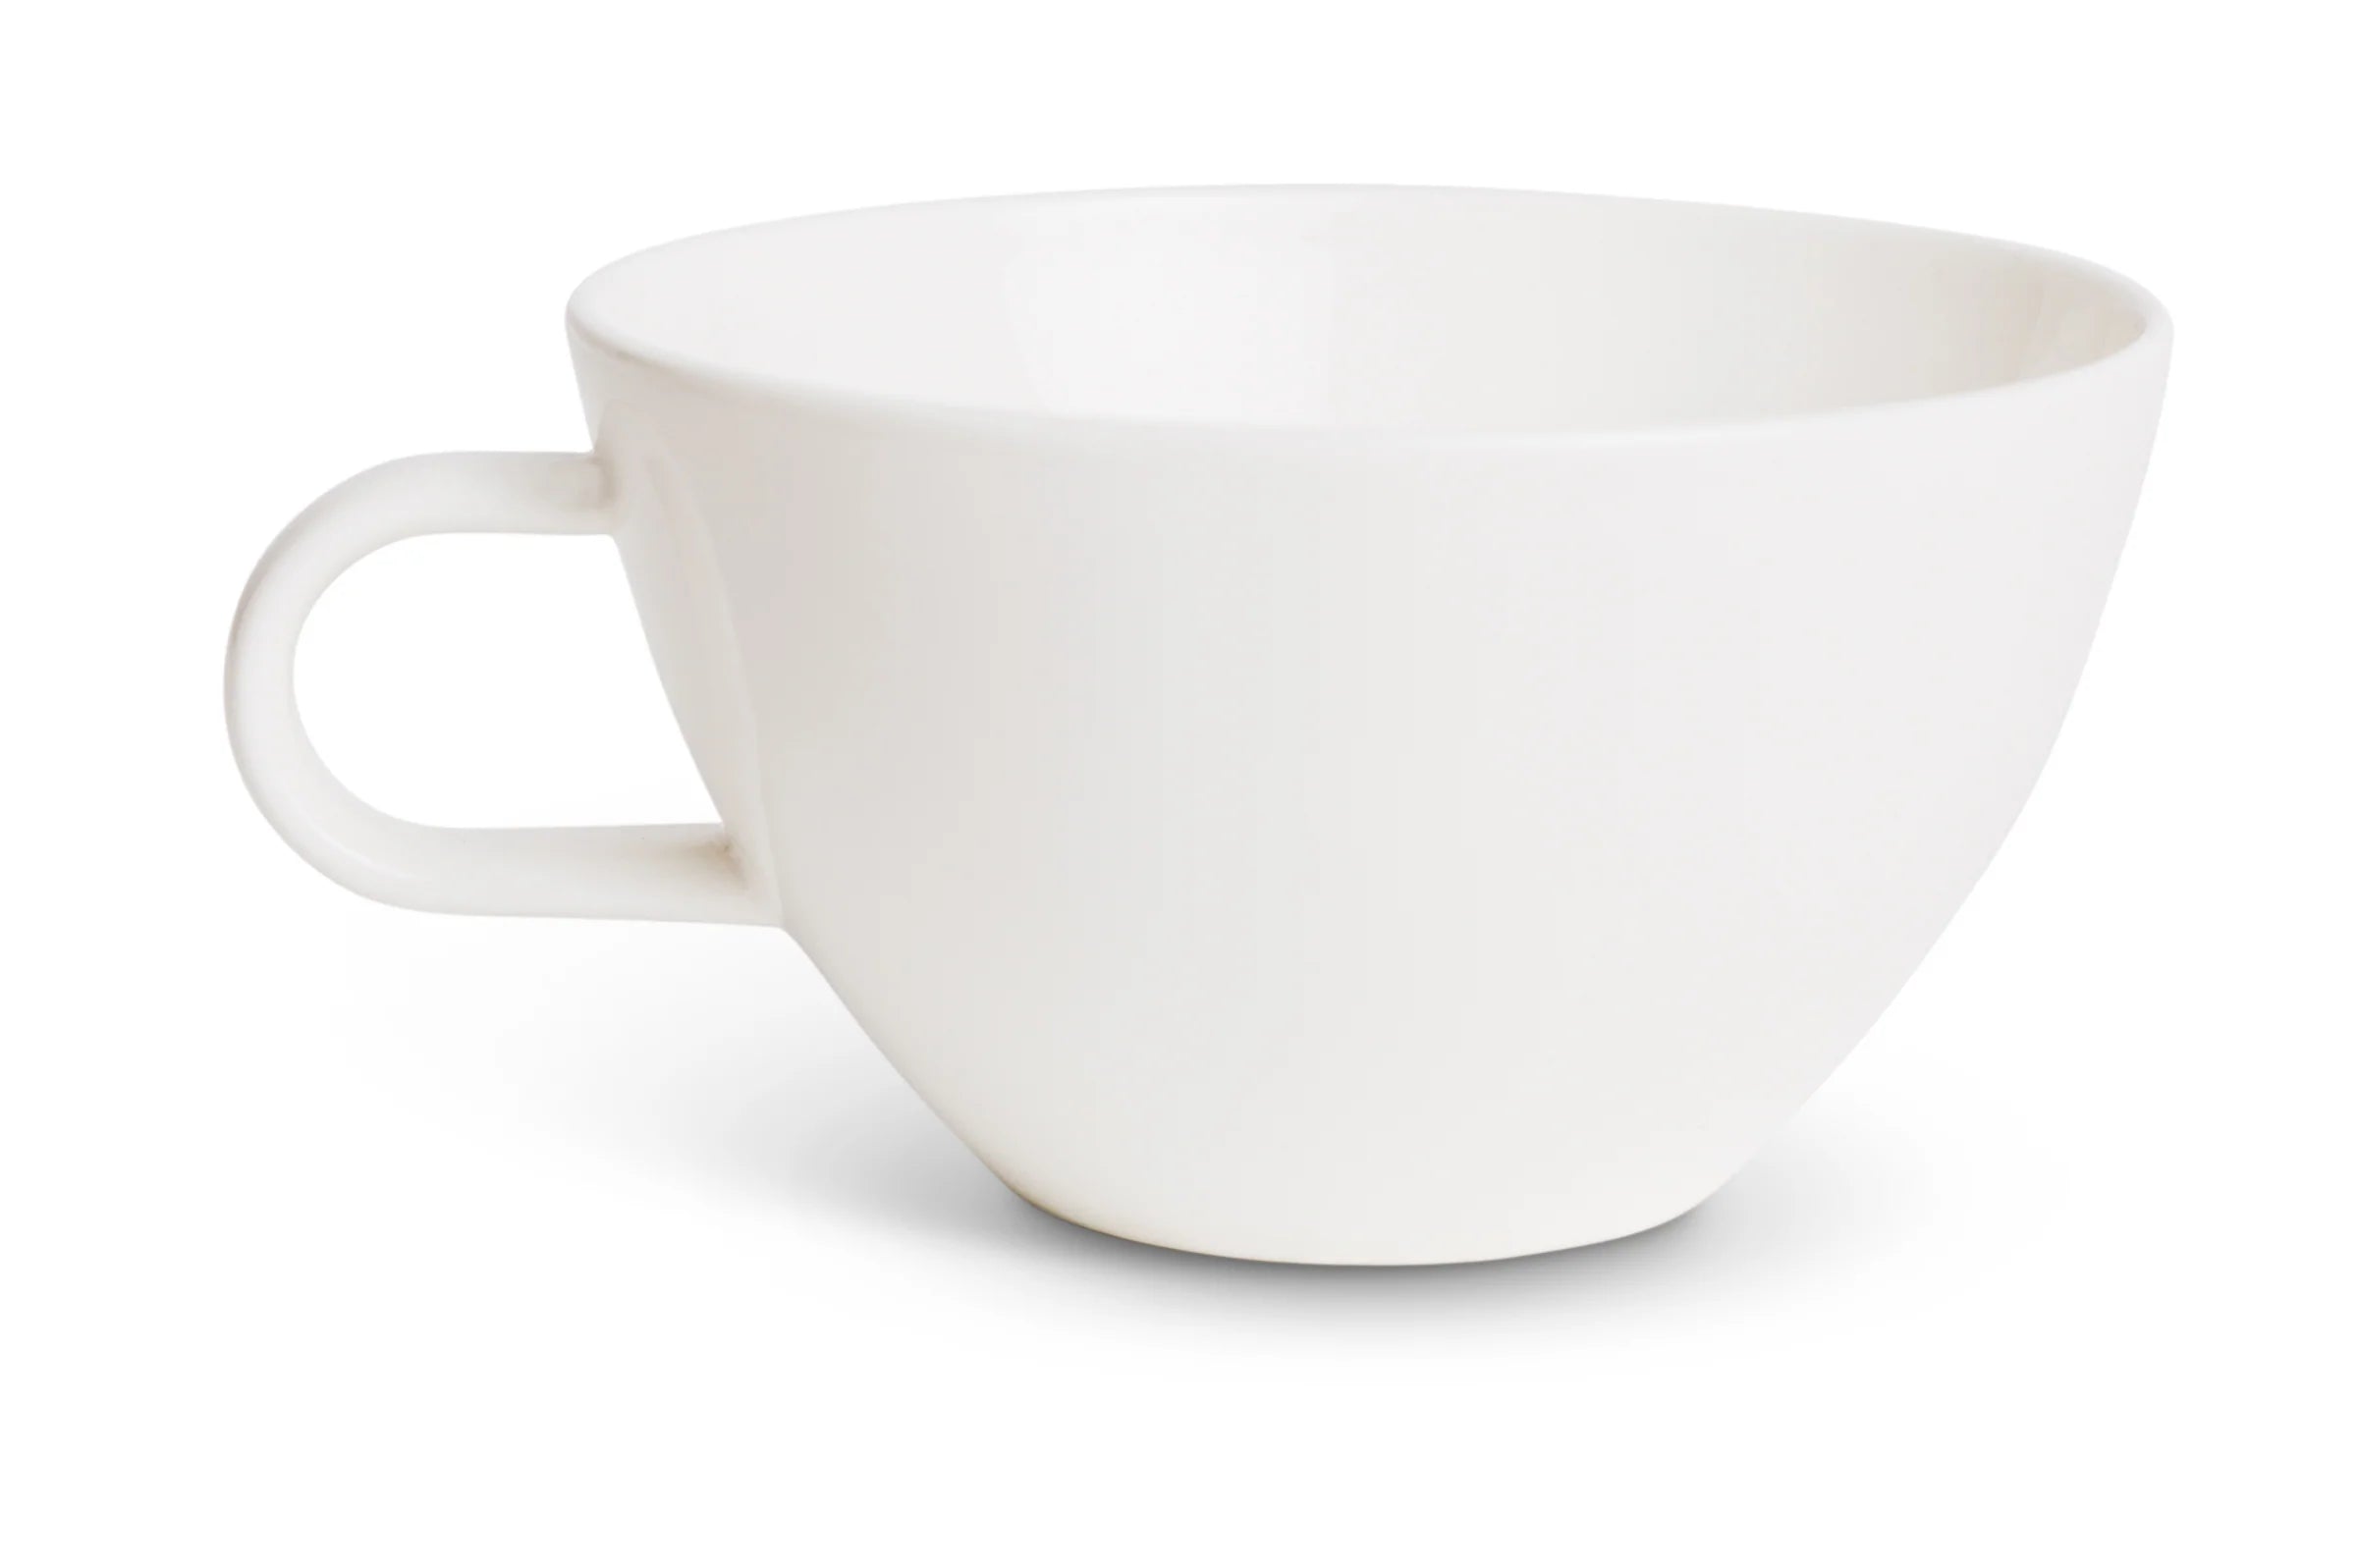 A white ceramic Tea for Two tea cup with a glass infuser isolated on a white background by giftbox co.